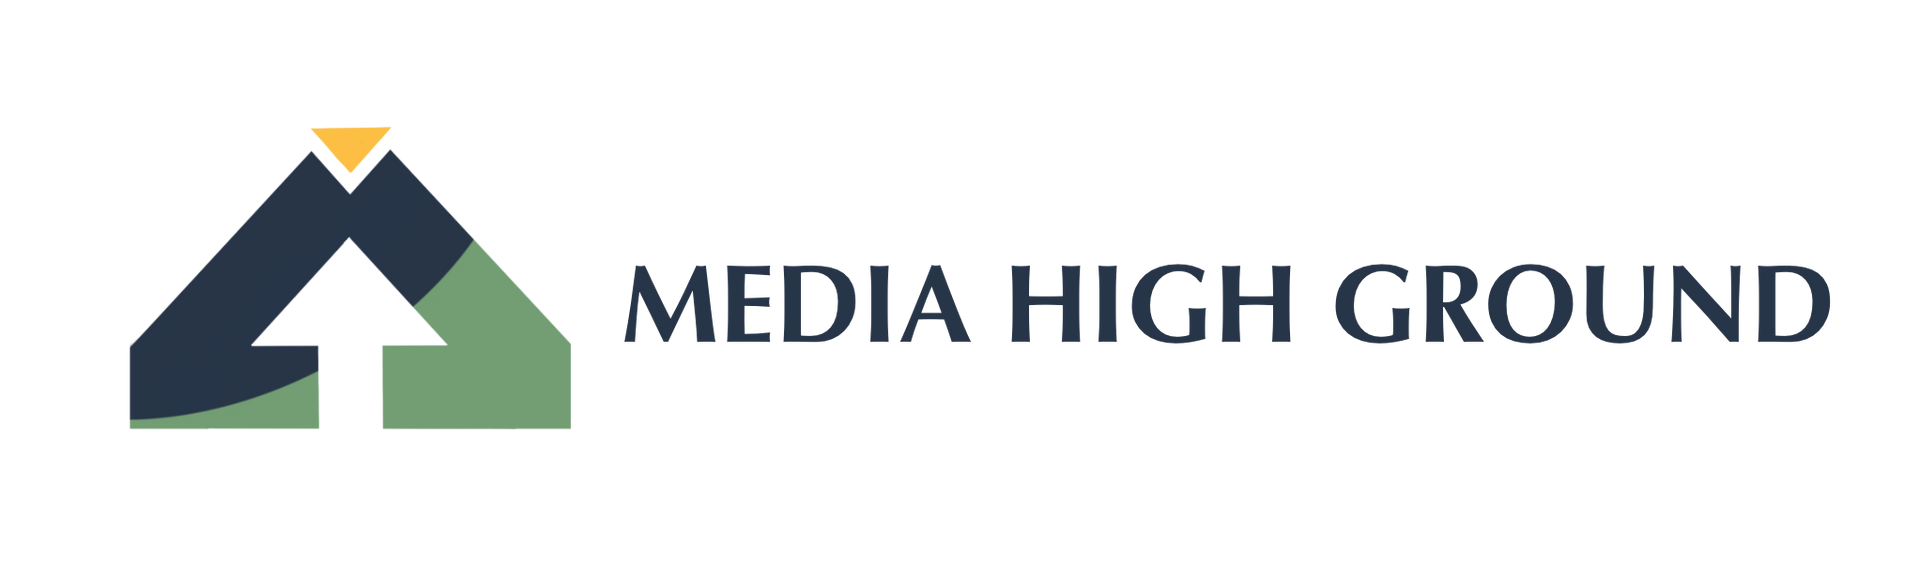 Check out the most recent activity on High Ground Media, LLC!